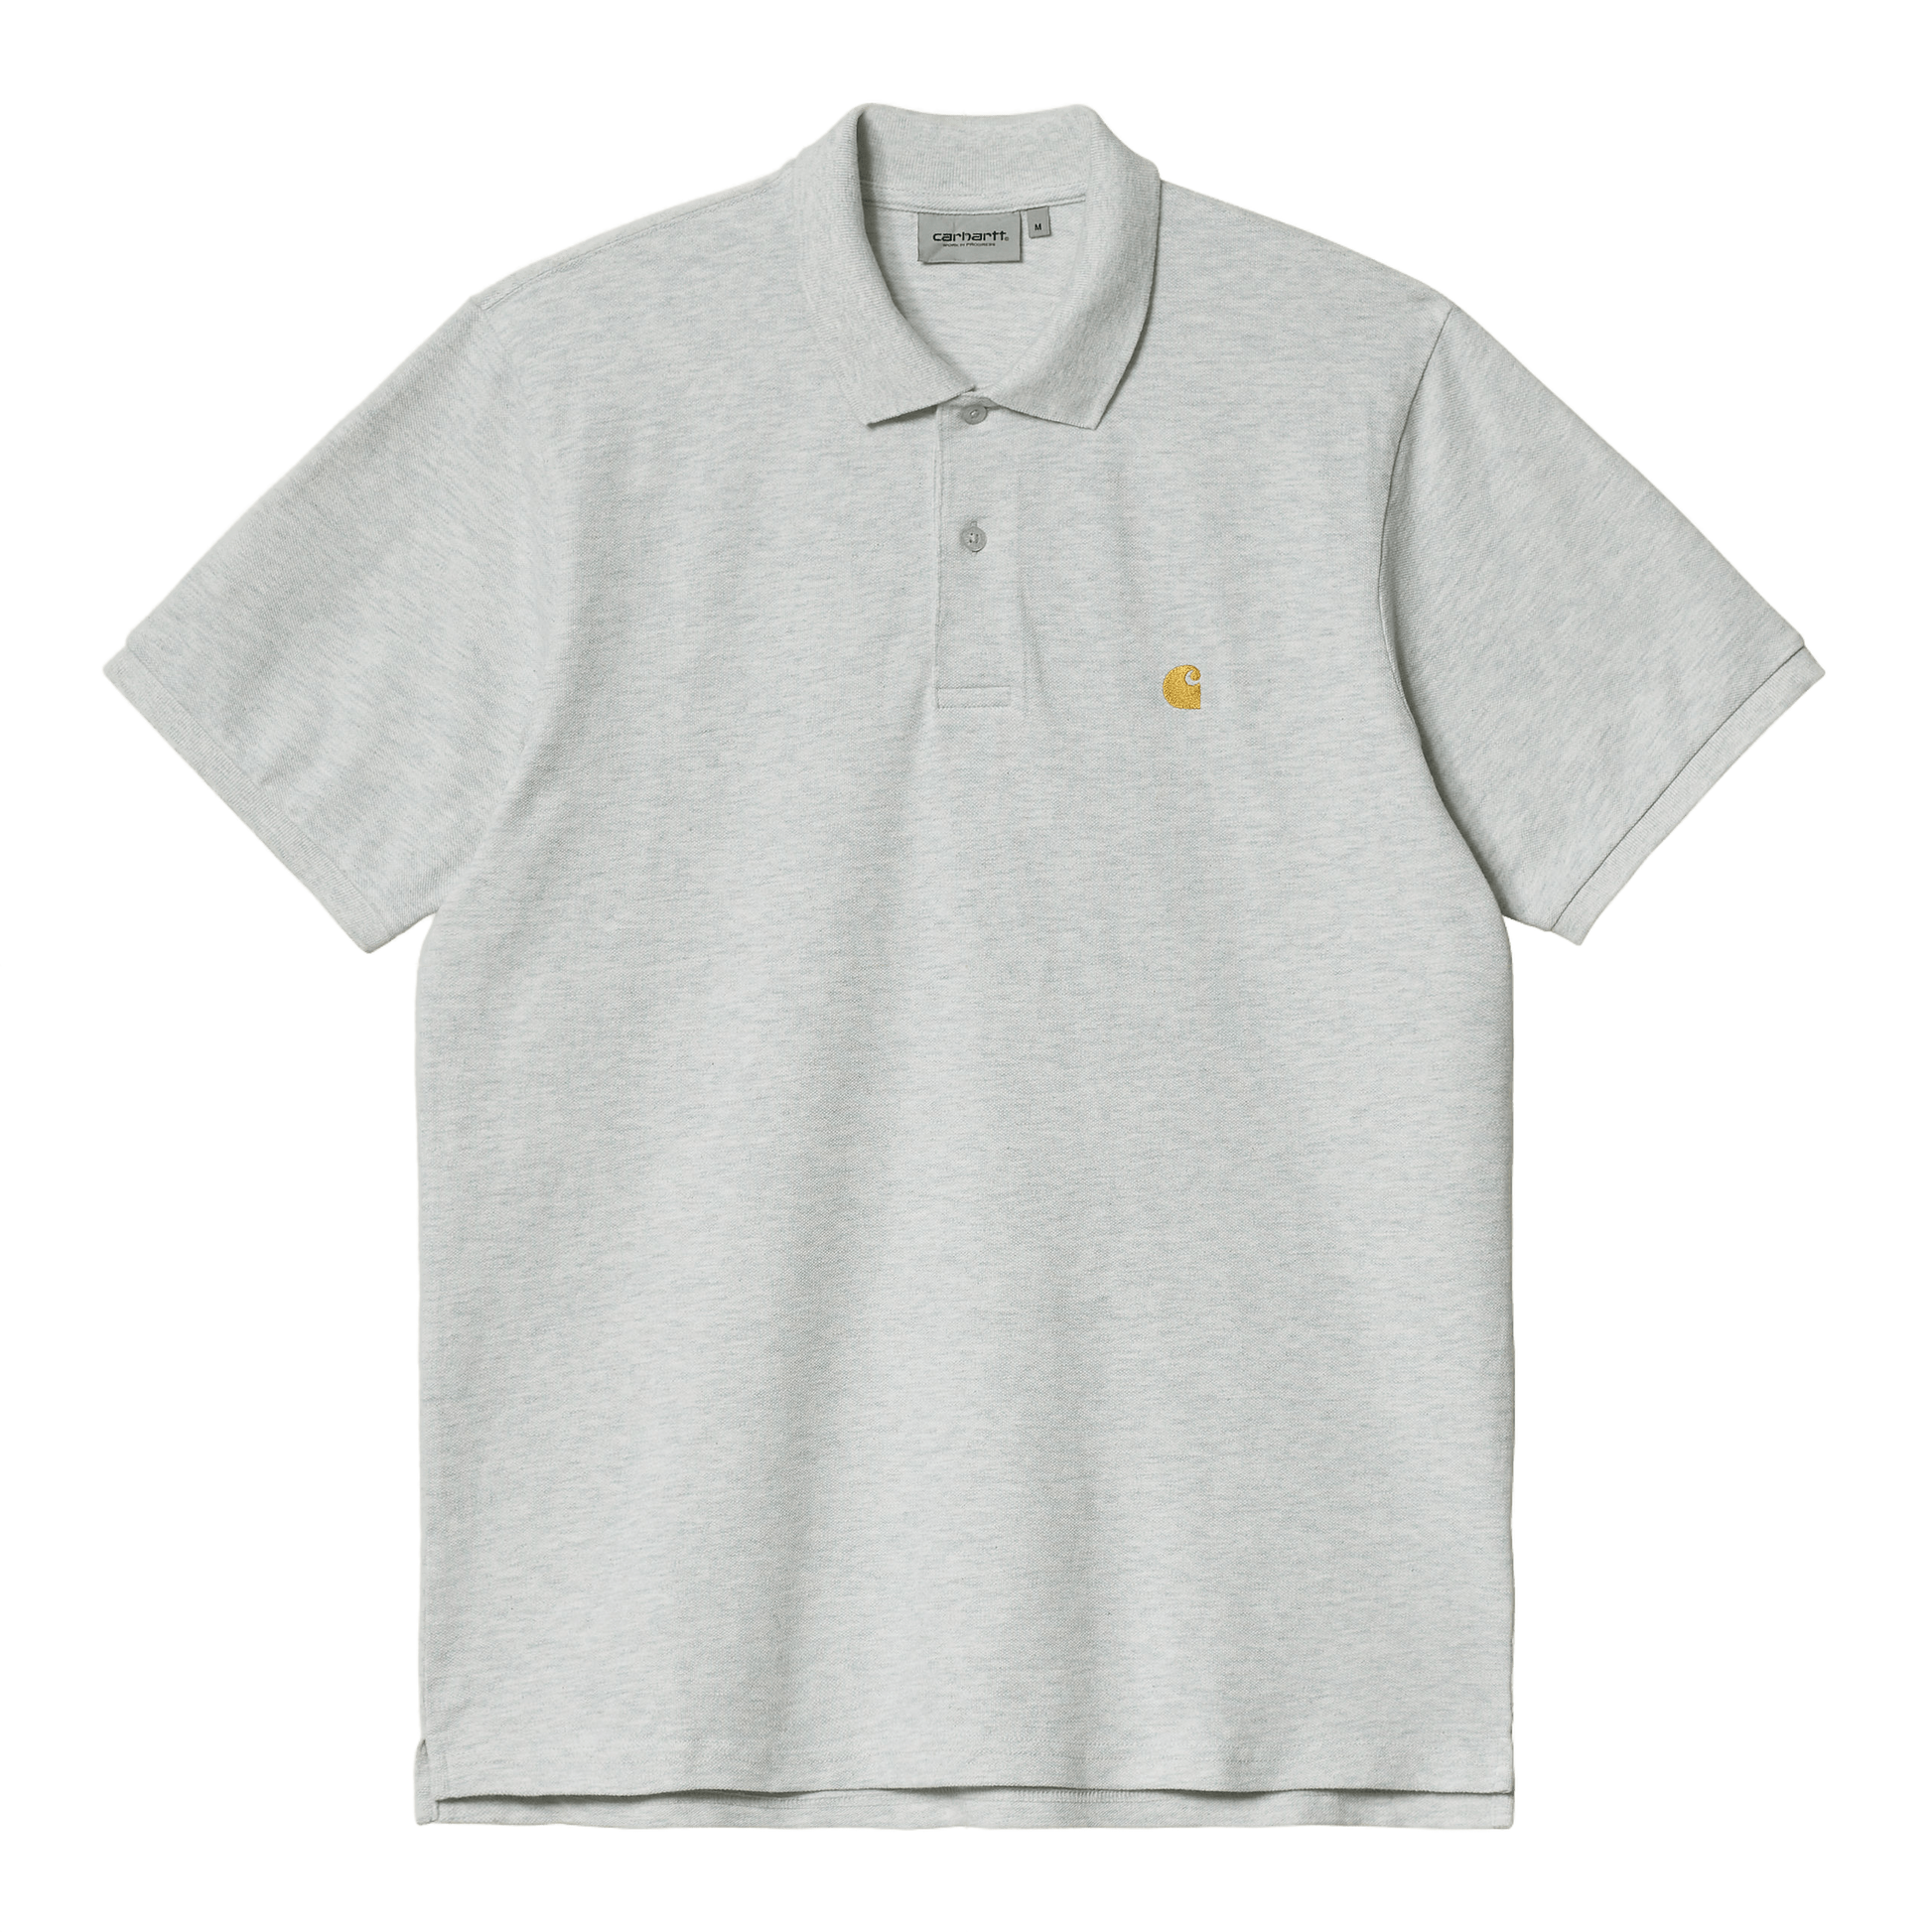 CARHARTT WIP - S/S CHASE PIQUE POLO ASH HEATHER/ GOLD